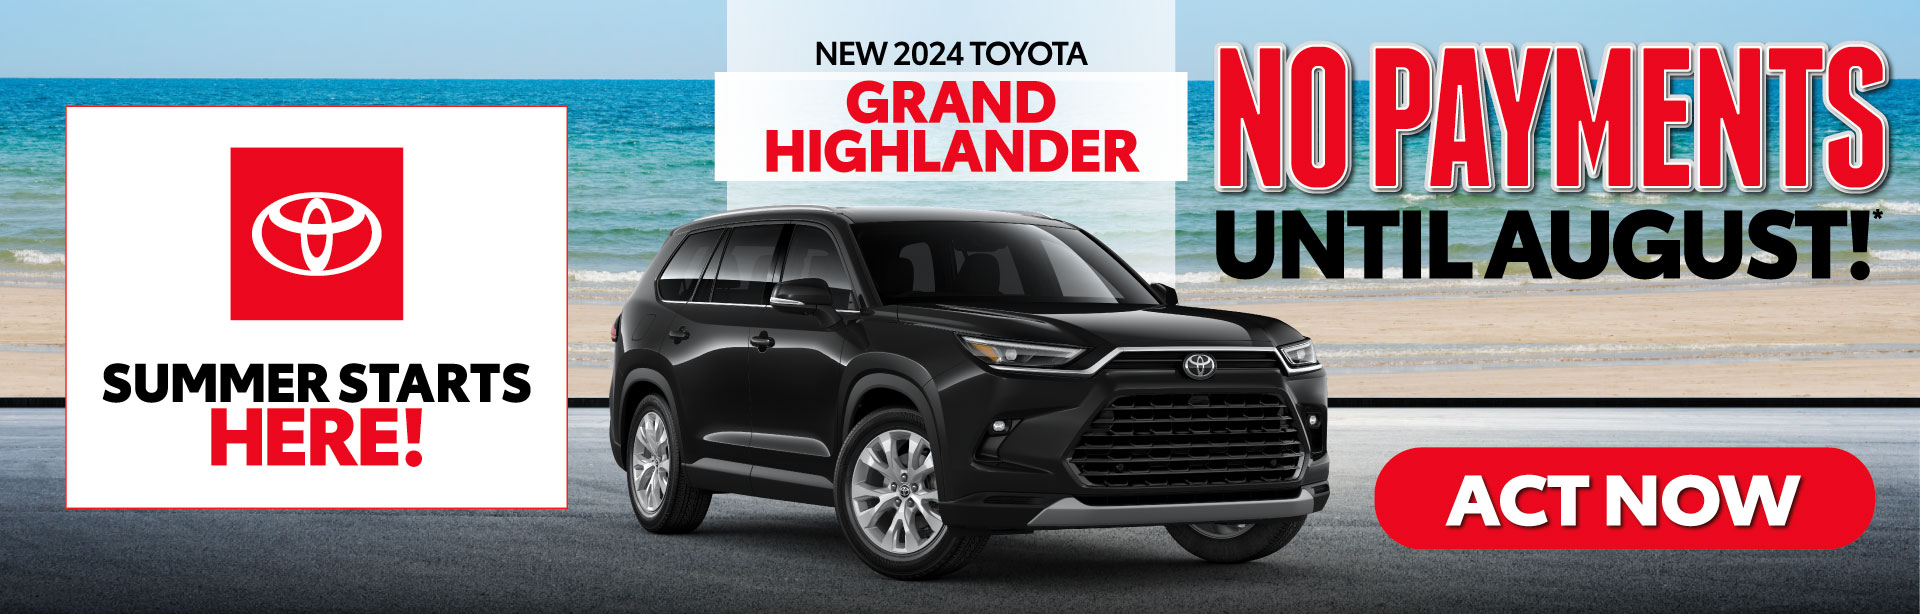 New 2024 Toyota Grand Highlander - No Payments Until August!* | Act Now